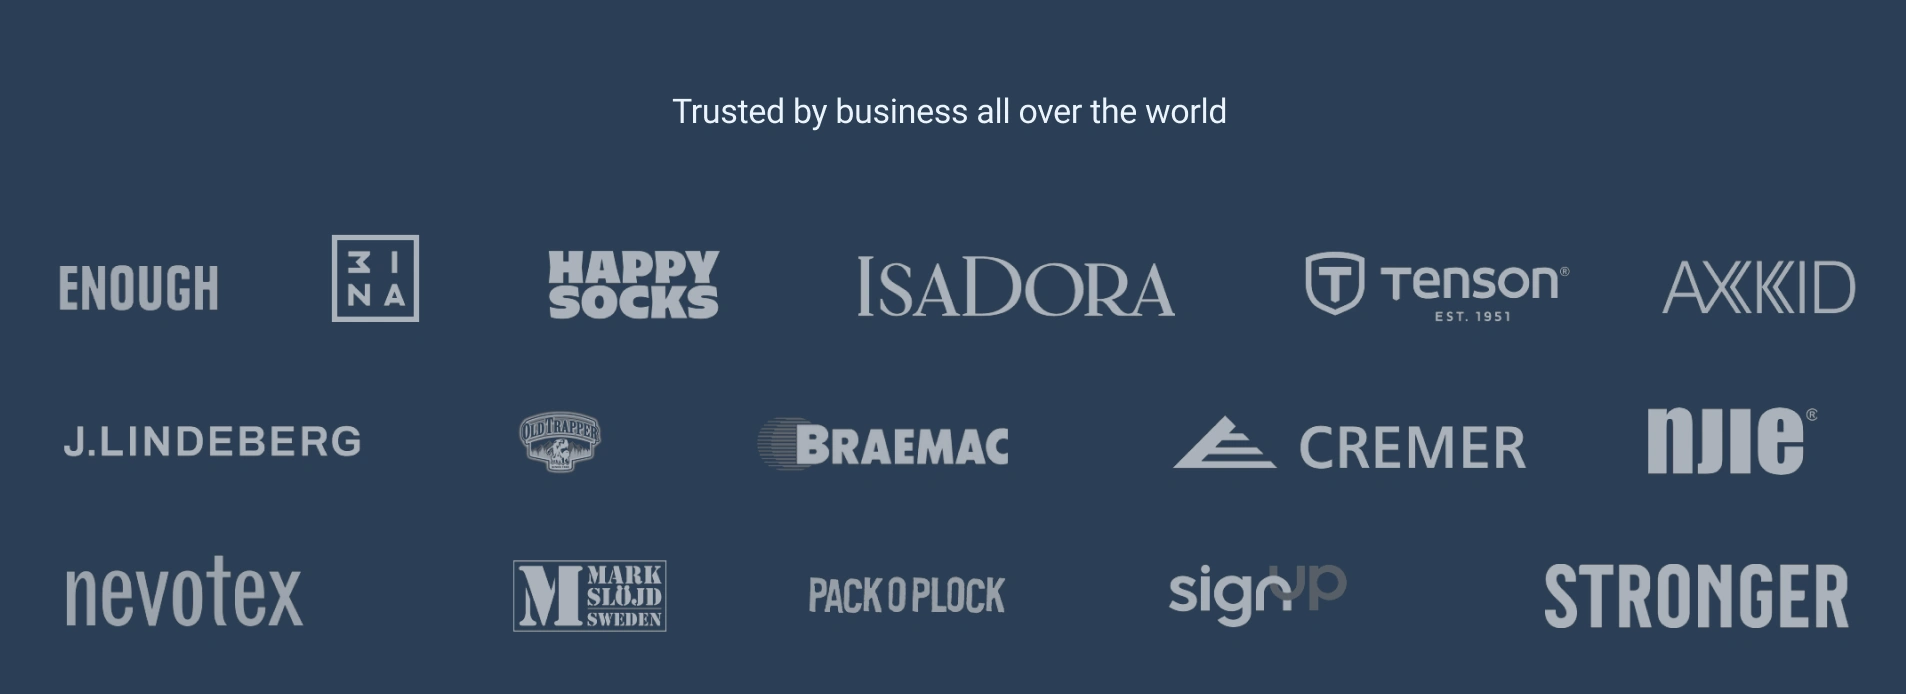 Golden EDI is trusted by these brands